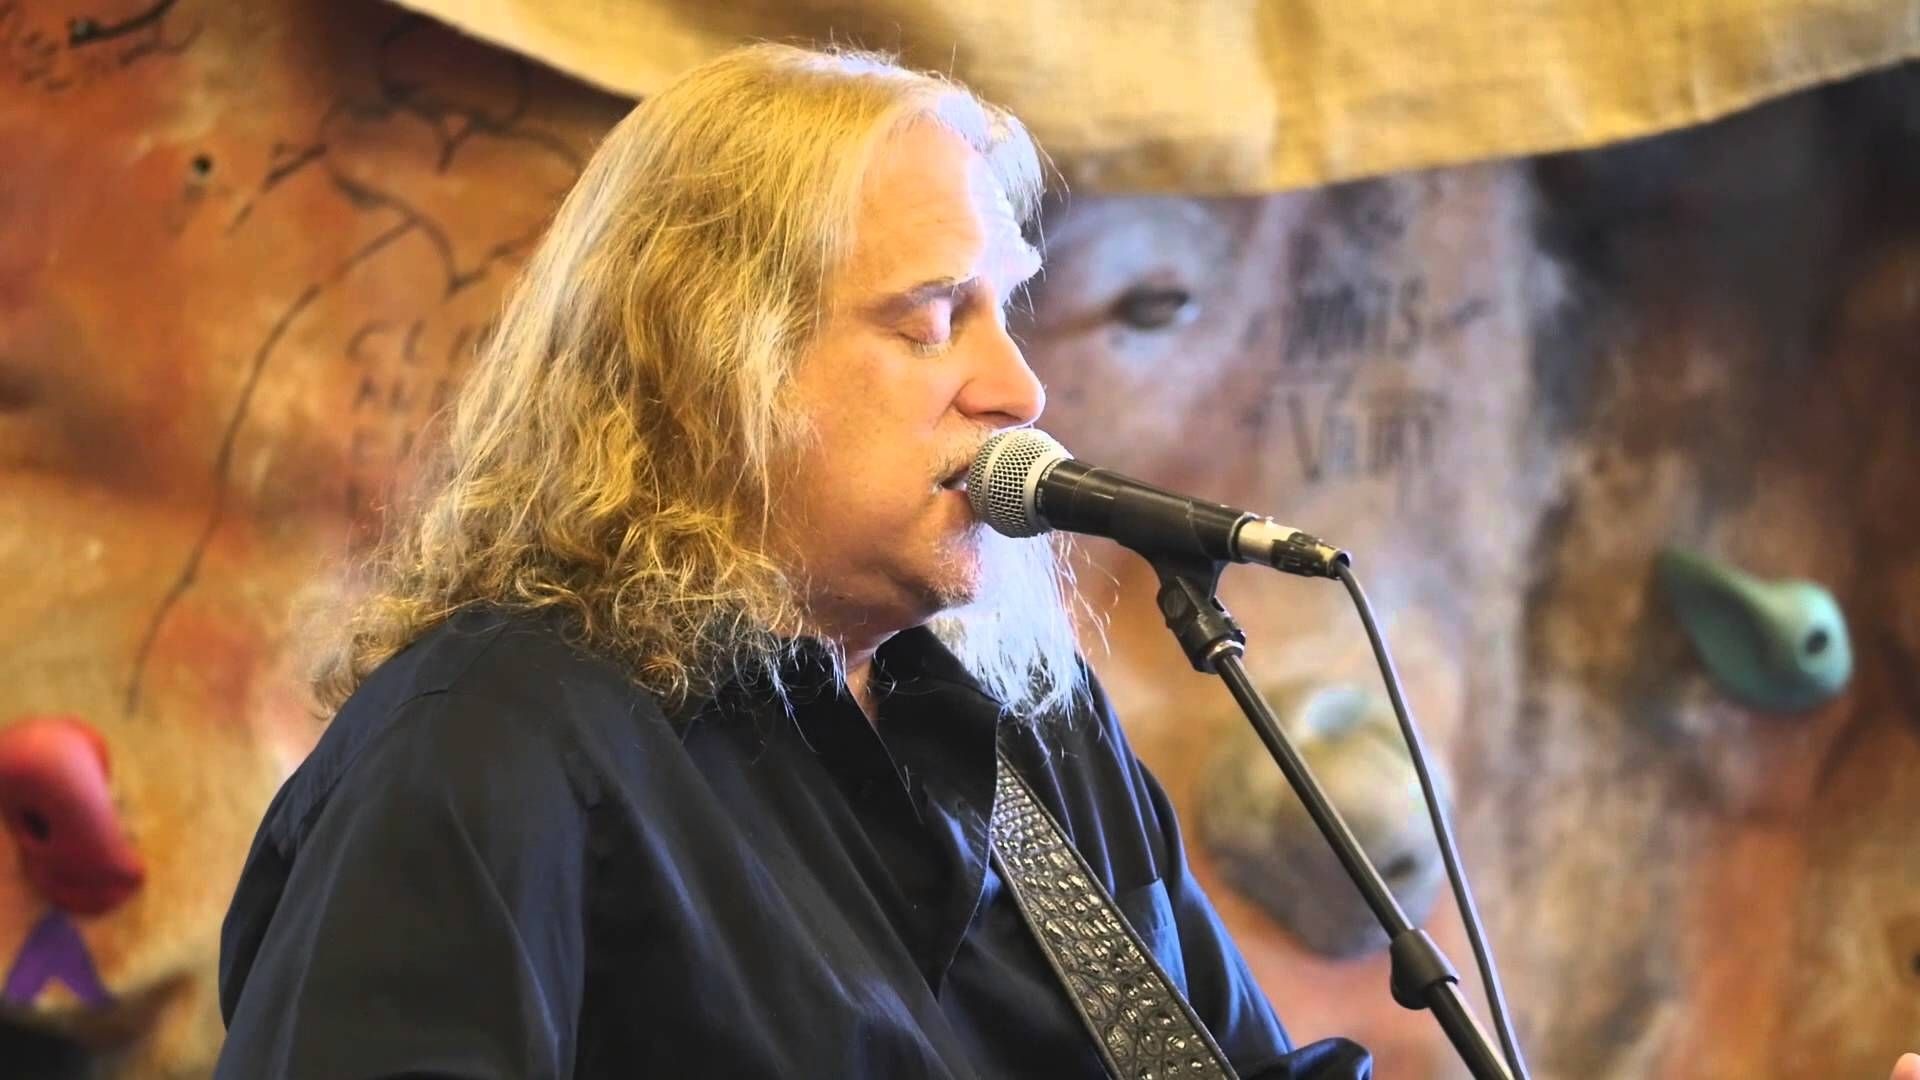 Warren Haynes, Old friends reunion, Gathering of the Vibes festival, Half Moon Outfitters, 1920x1080 Full HD Desktop